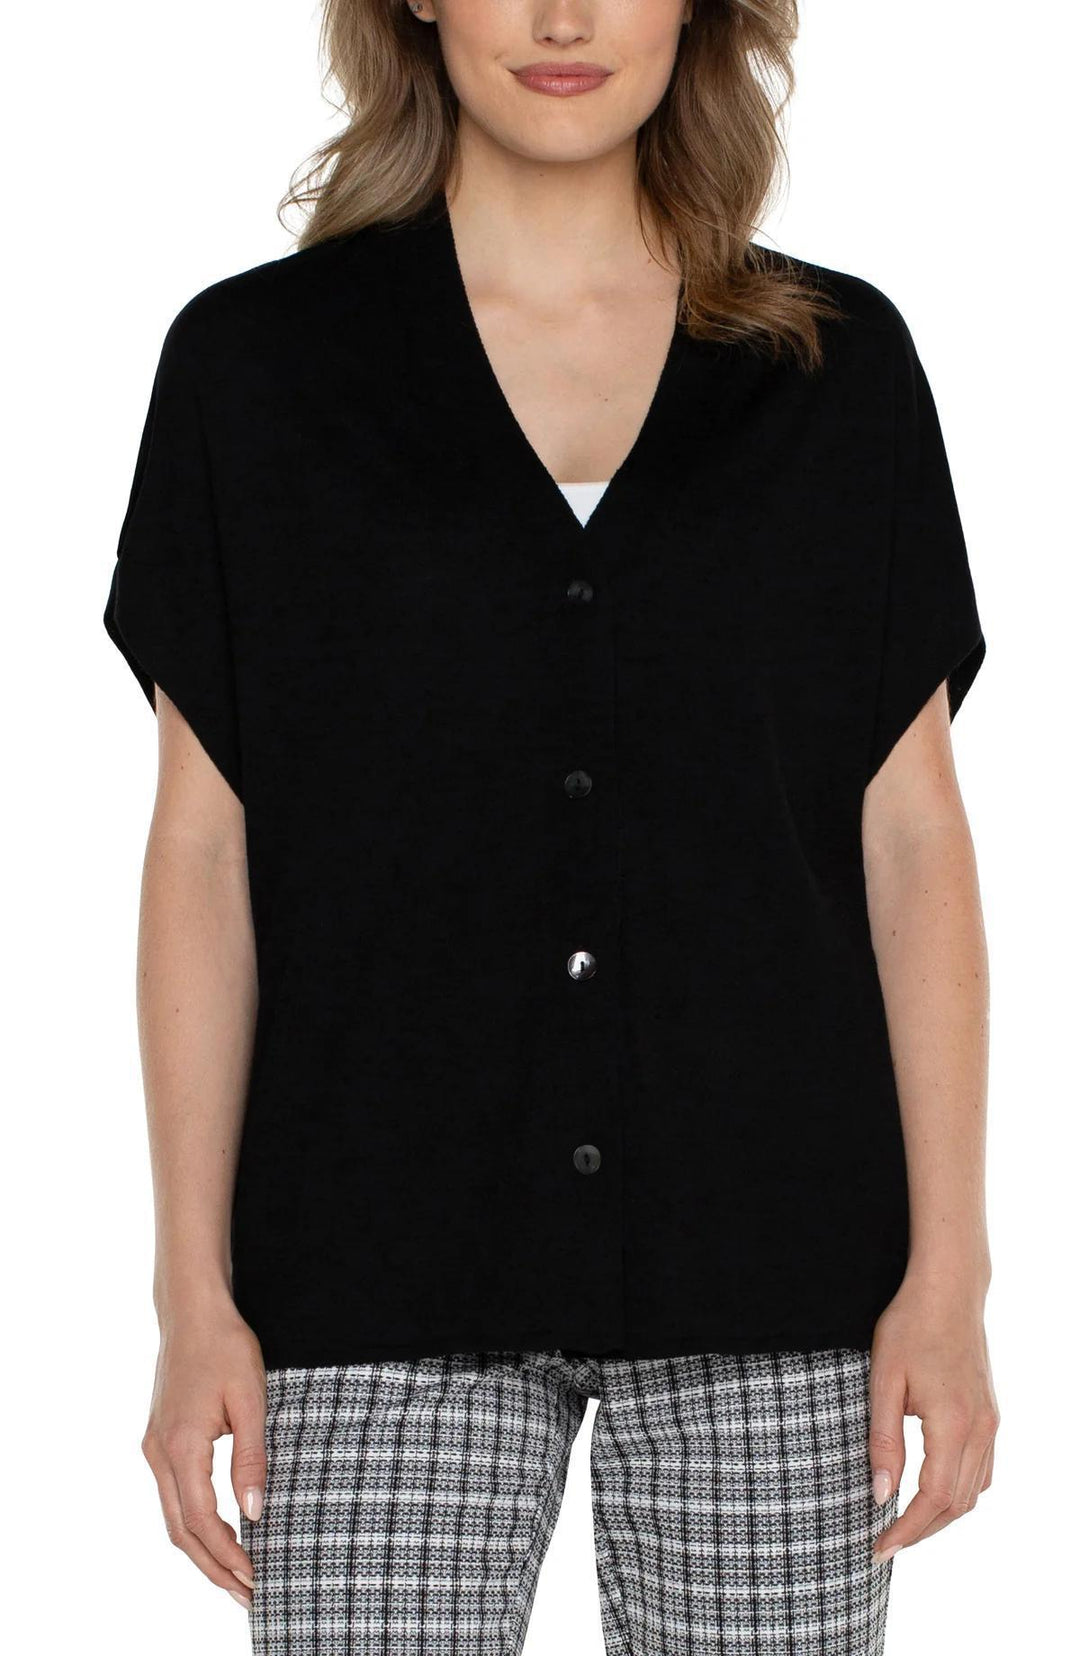 Button Front Dolman Cardigan Sweater